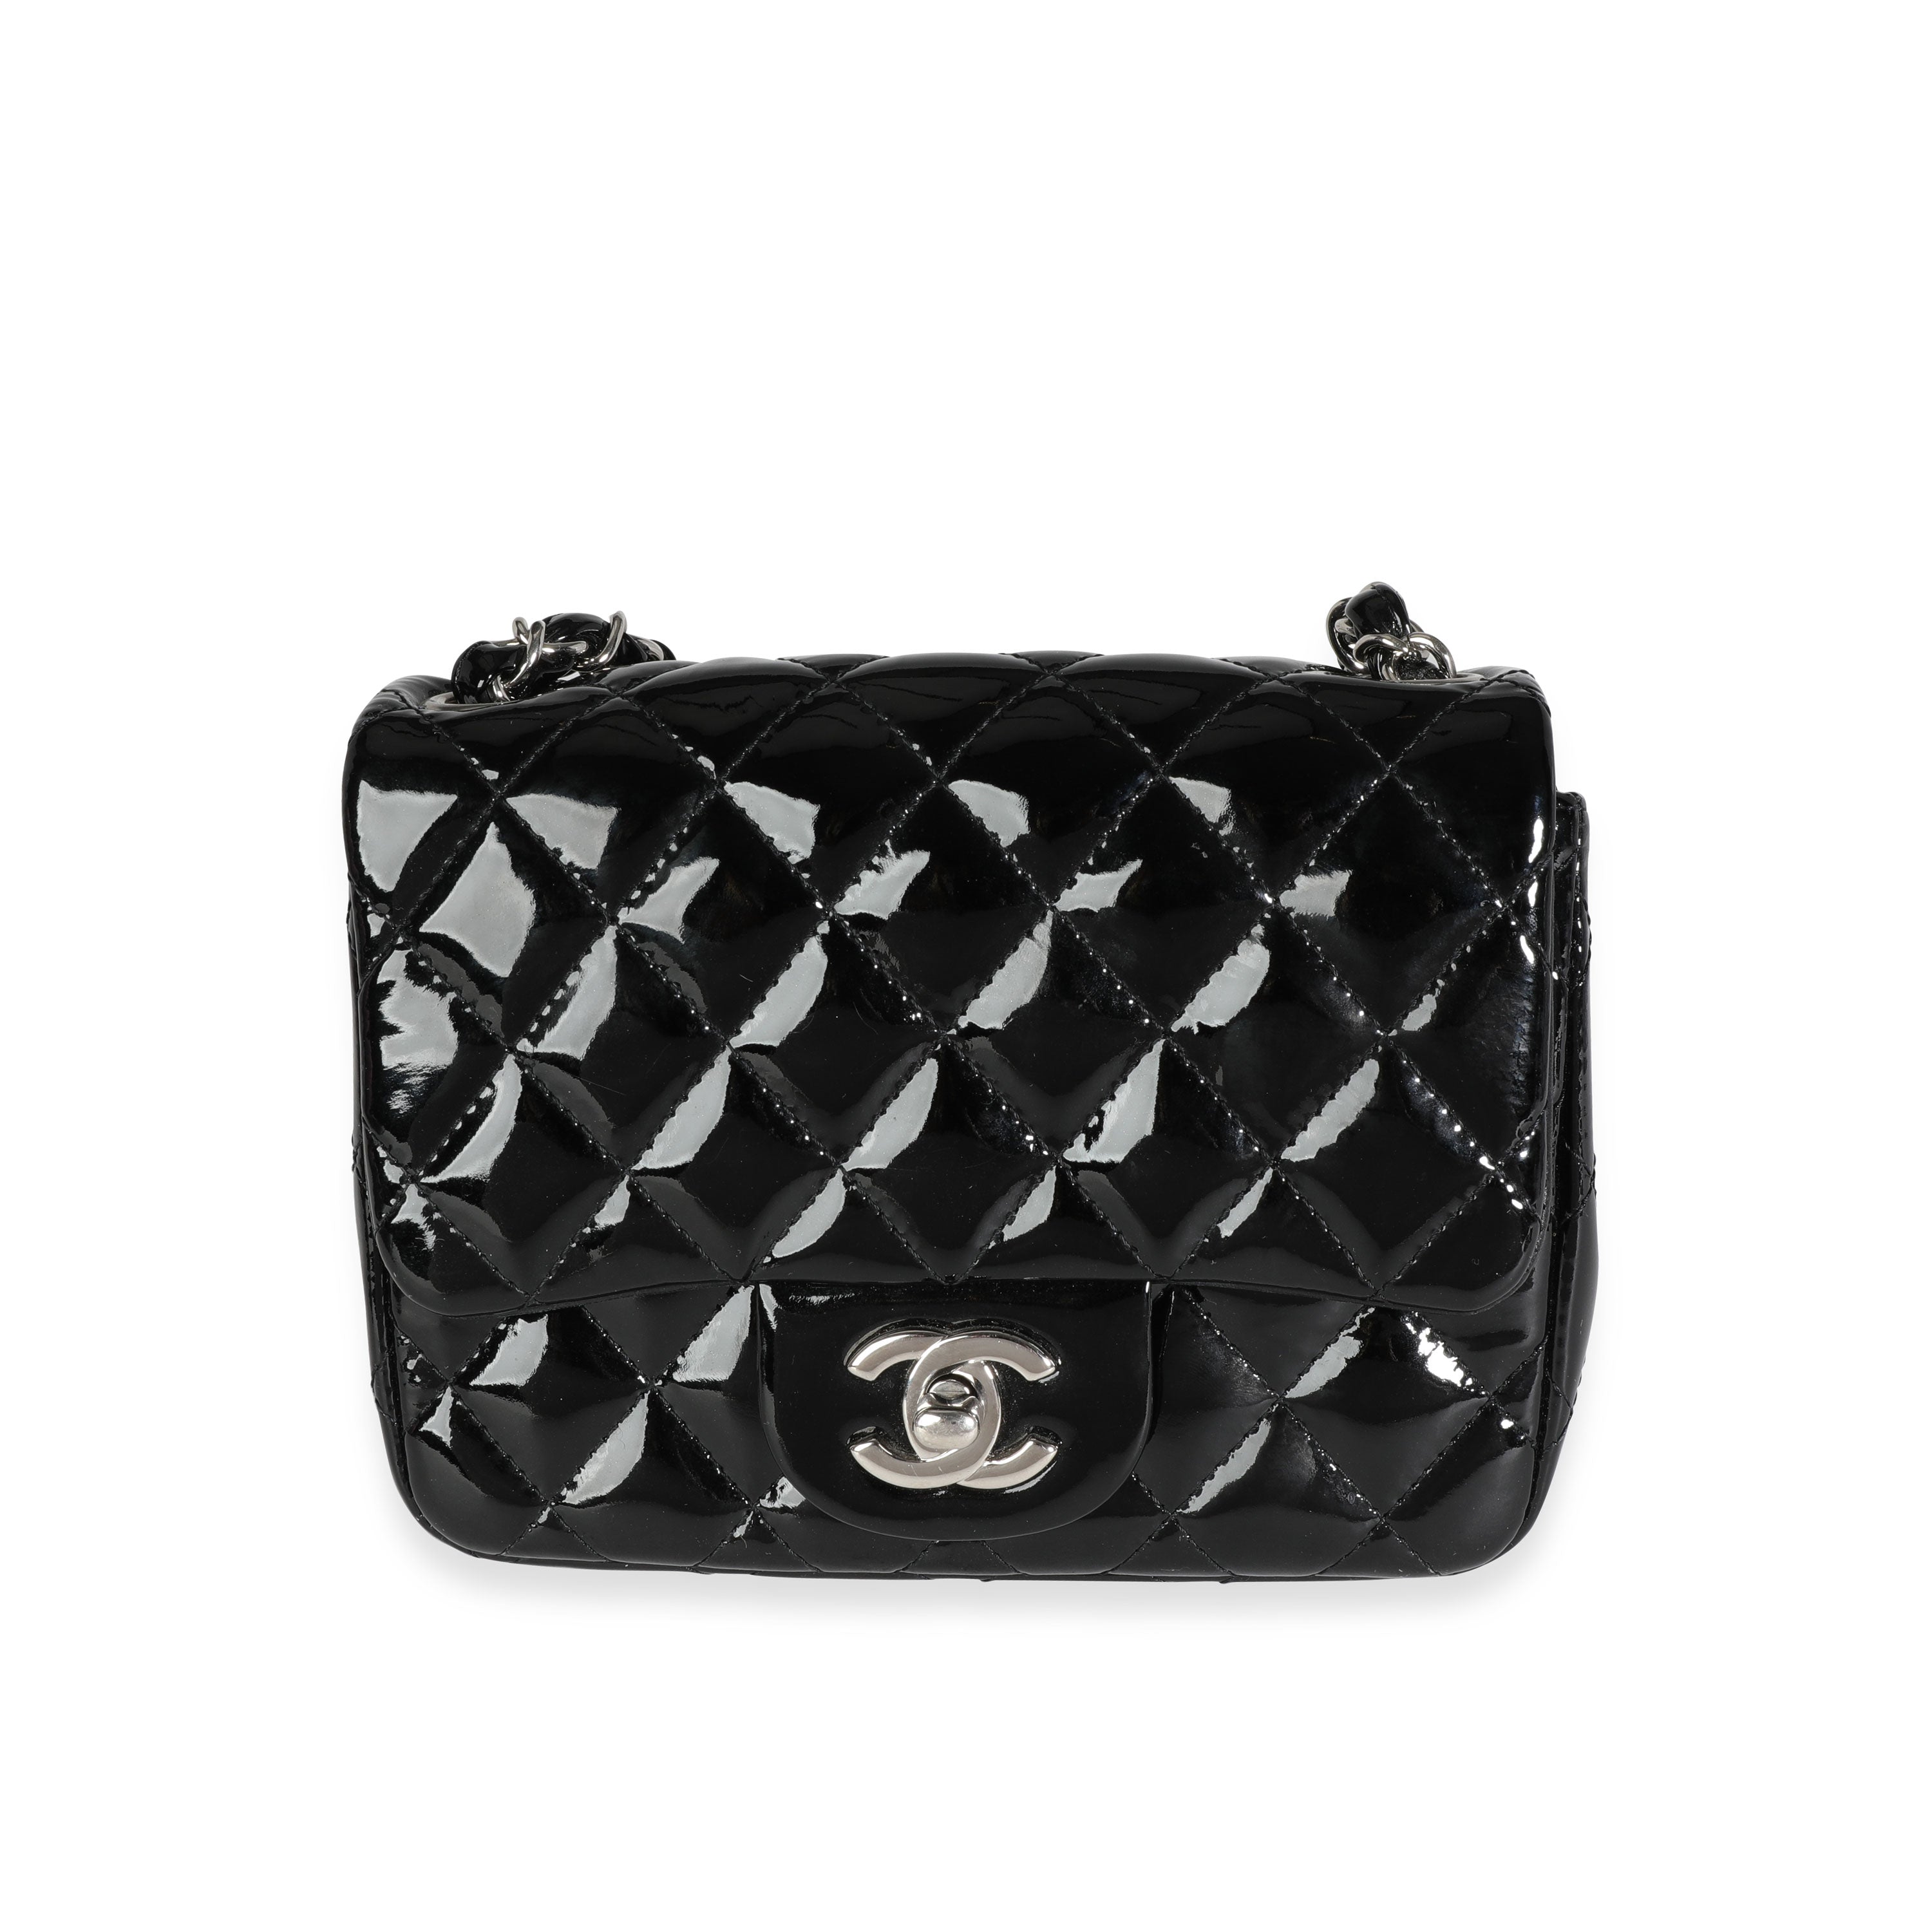 Chanel Black Quilted Patent Leather Classic Square Mini Flap Bag, myGemma